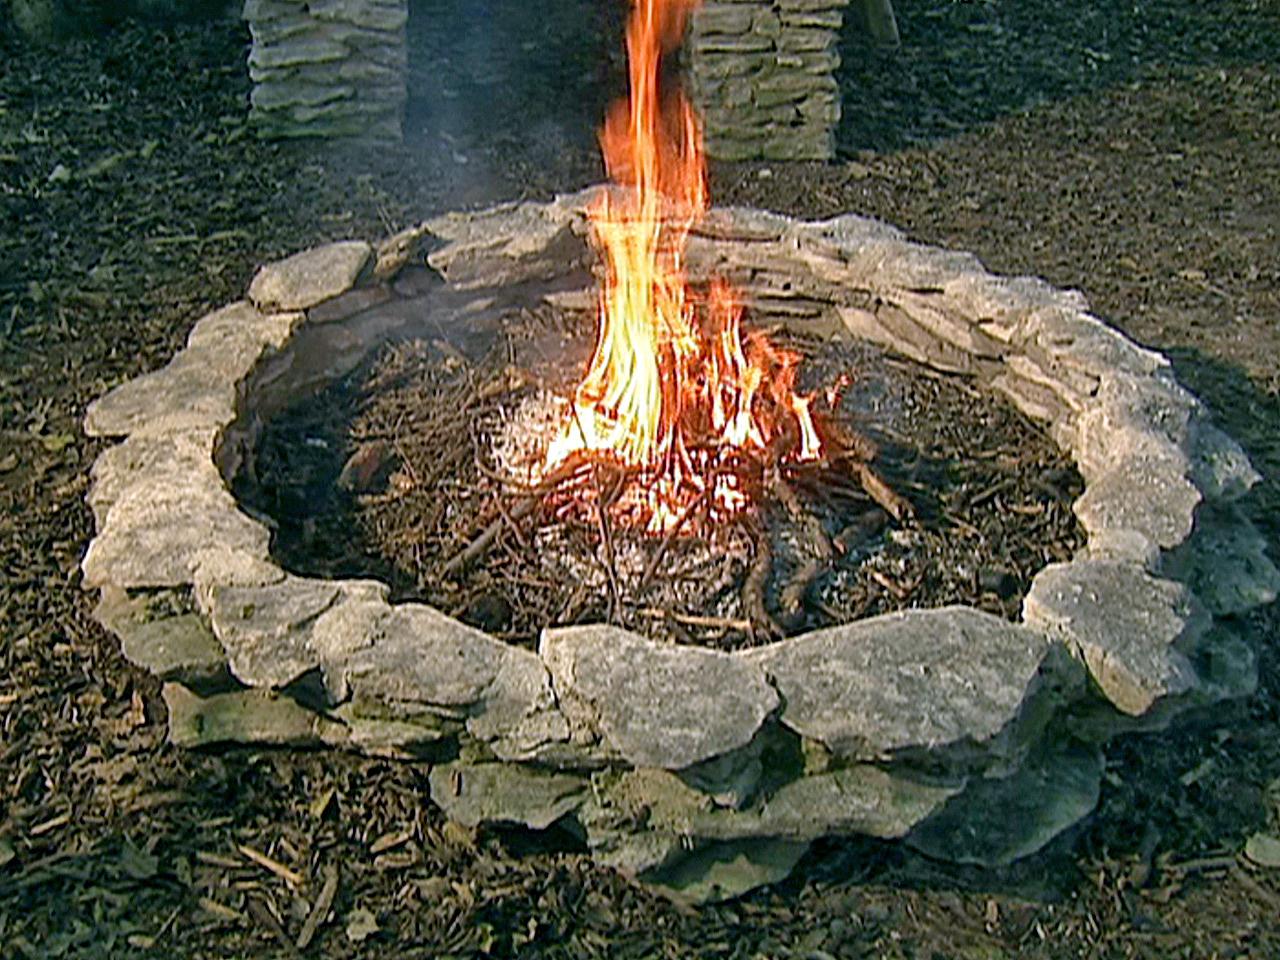 Outdoor Fire Pits And Pit Safety, How To Put Out A Wood Fire Pit